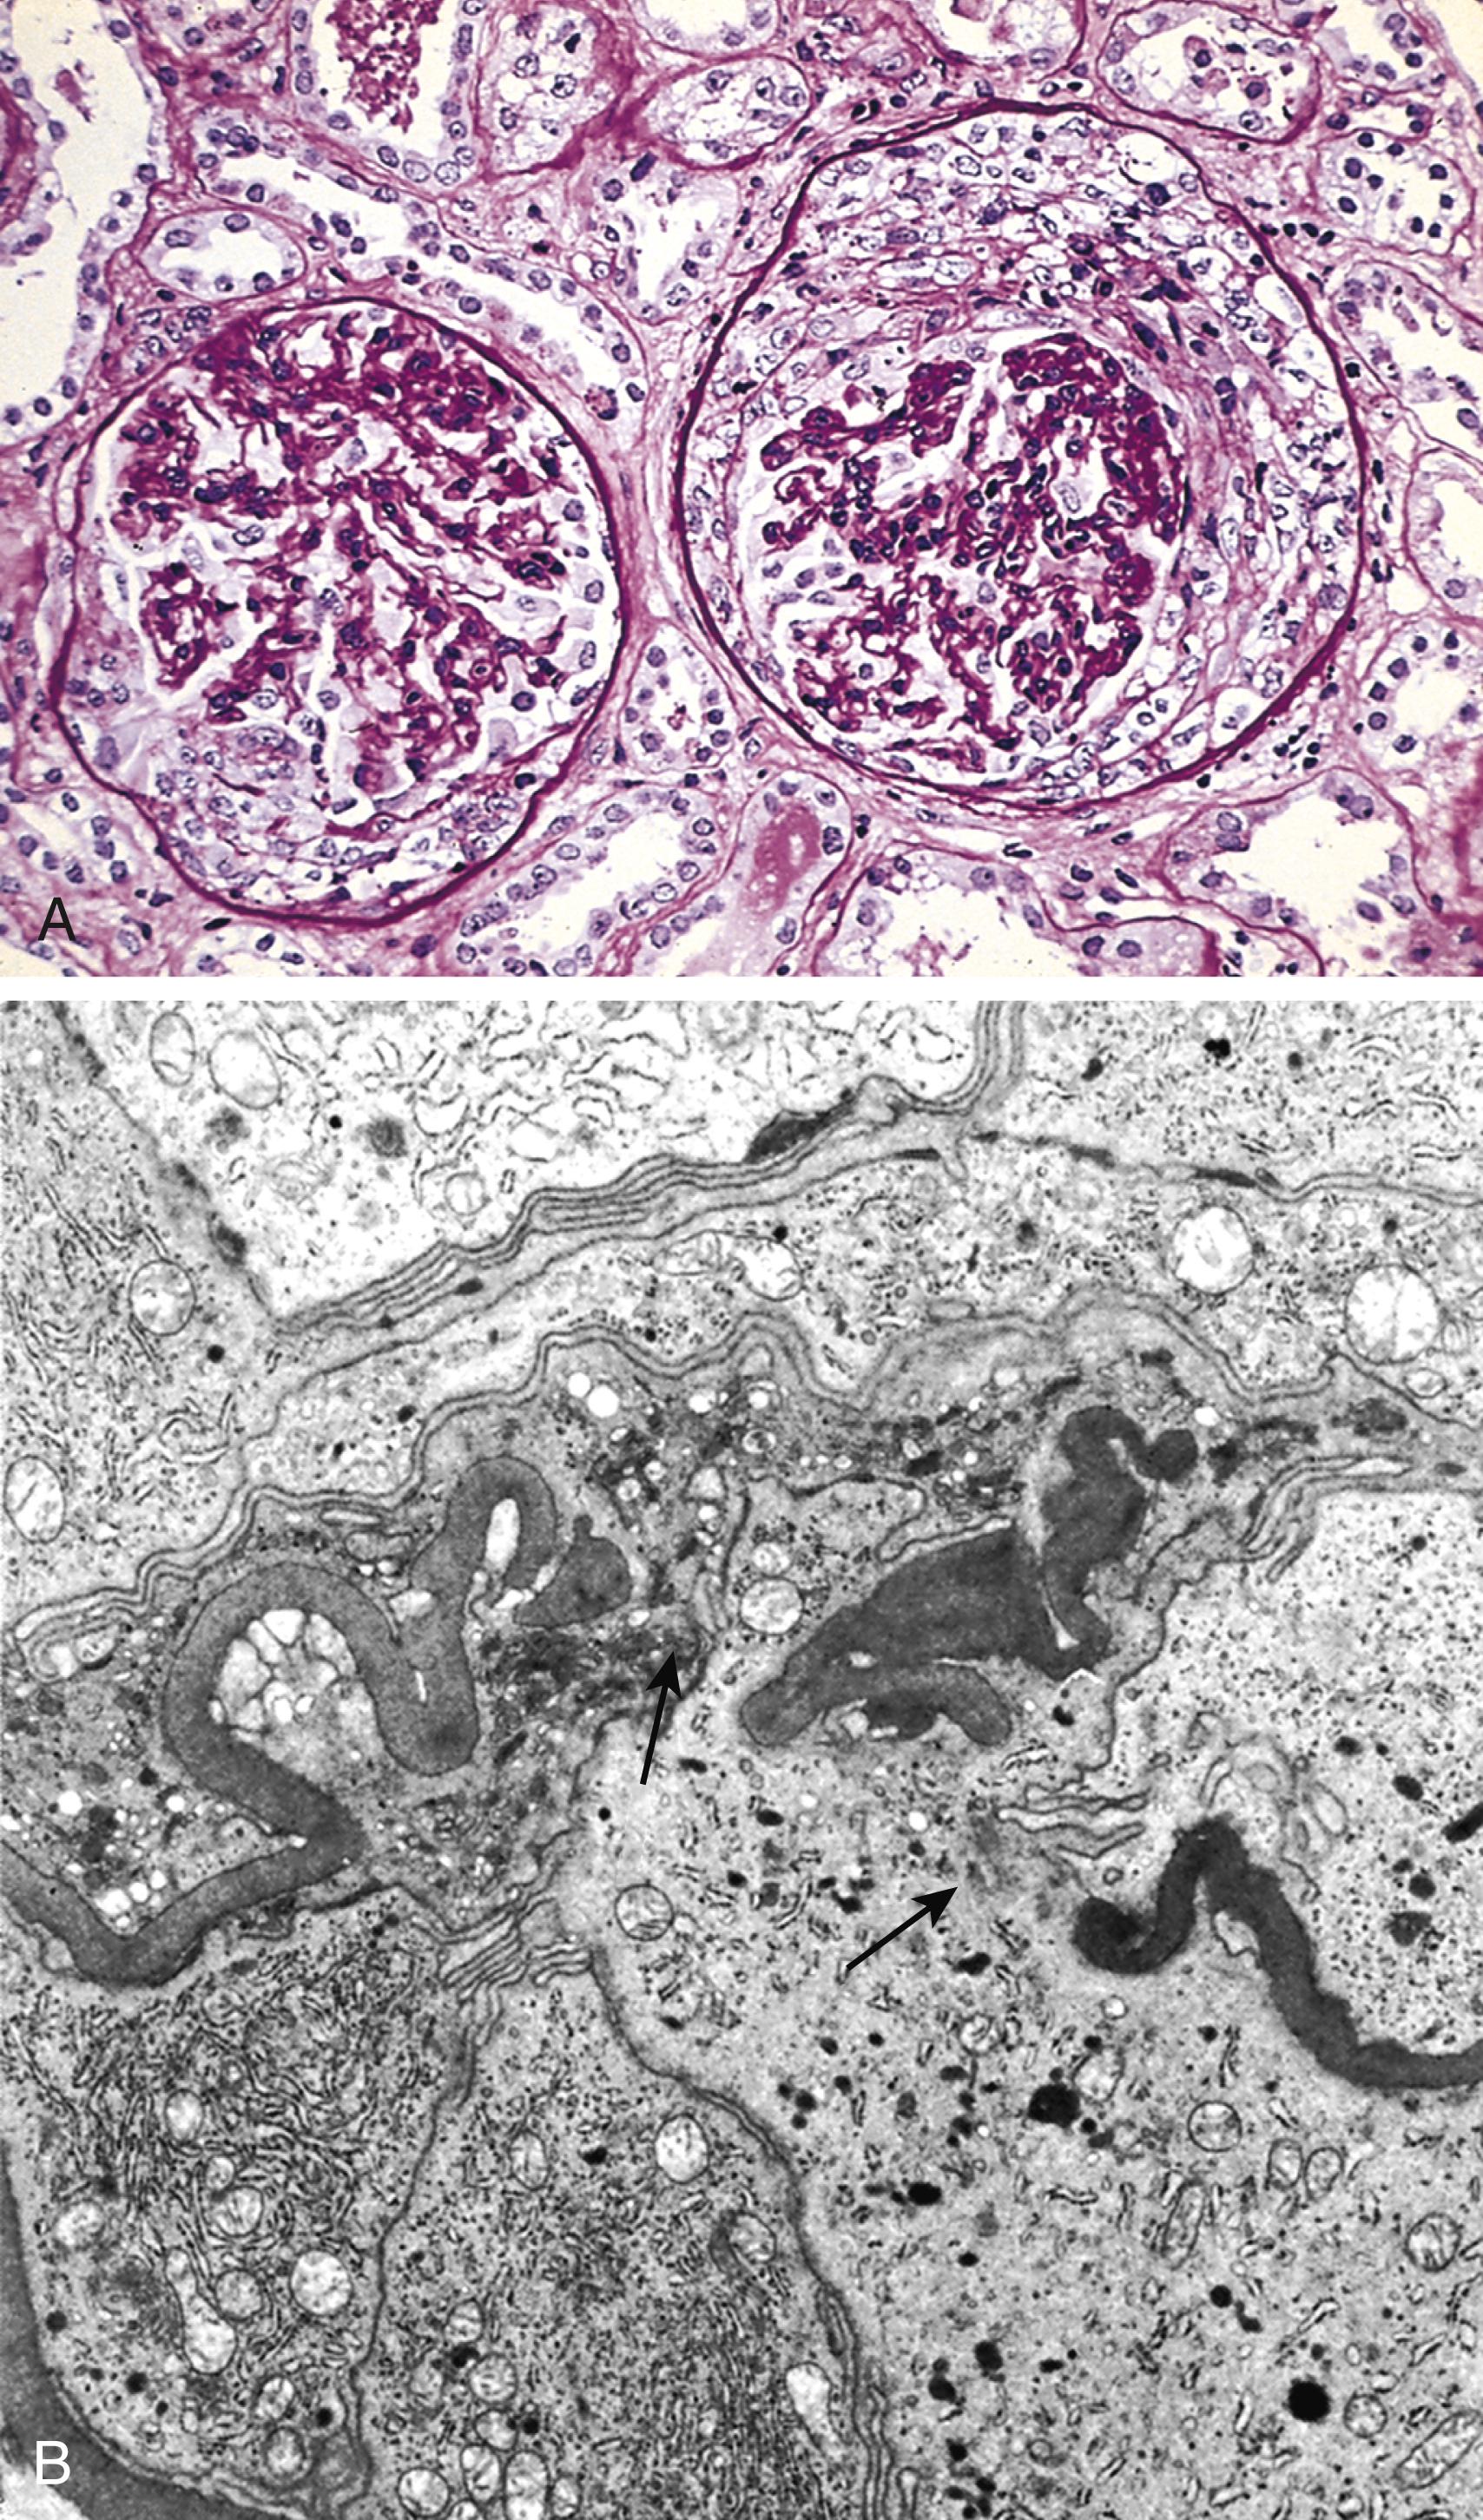 FIG. 12.10, Crescentic glomerulonephritis (A) Compressed glomerular tufts and crescent-shaped mass of proliferating epithelial cells and leukocytes within the Bowman capsule (PAS stain). (B) Electron micrograph showing characteristic wrinkling of glomerular basement membrane with focal disruptions (arrows).